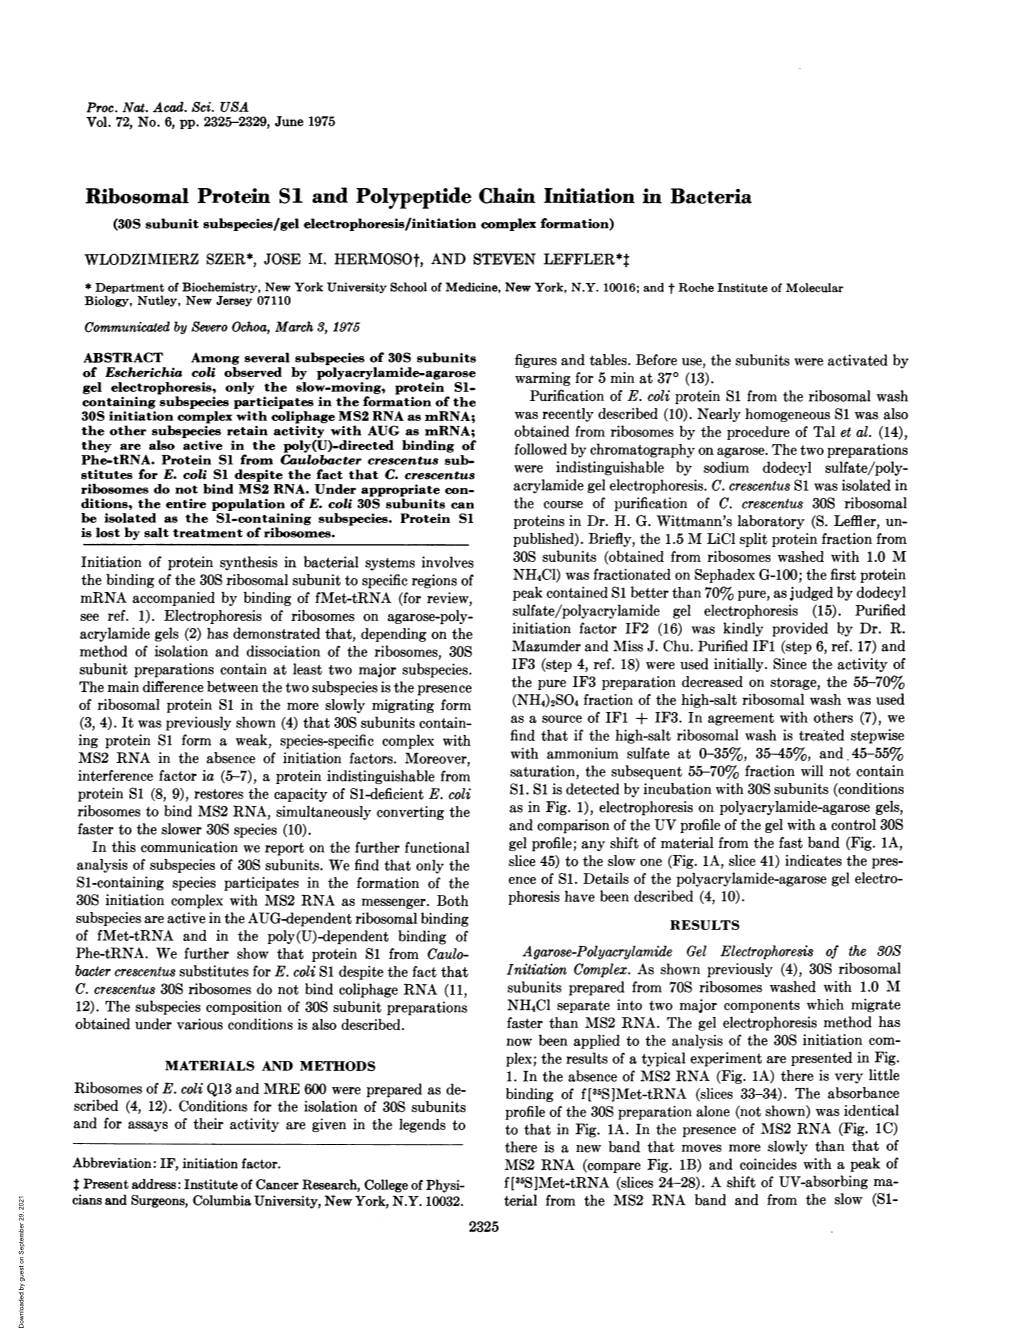 Ribosomal Protein SI and Polypeptide Chain Initiation in Bacteria (30S Subunit Subspecies/Gel Electrophoresis/Initiation Complex Formation) WLODZIMIERZ SZER*, JOSE M